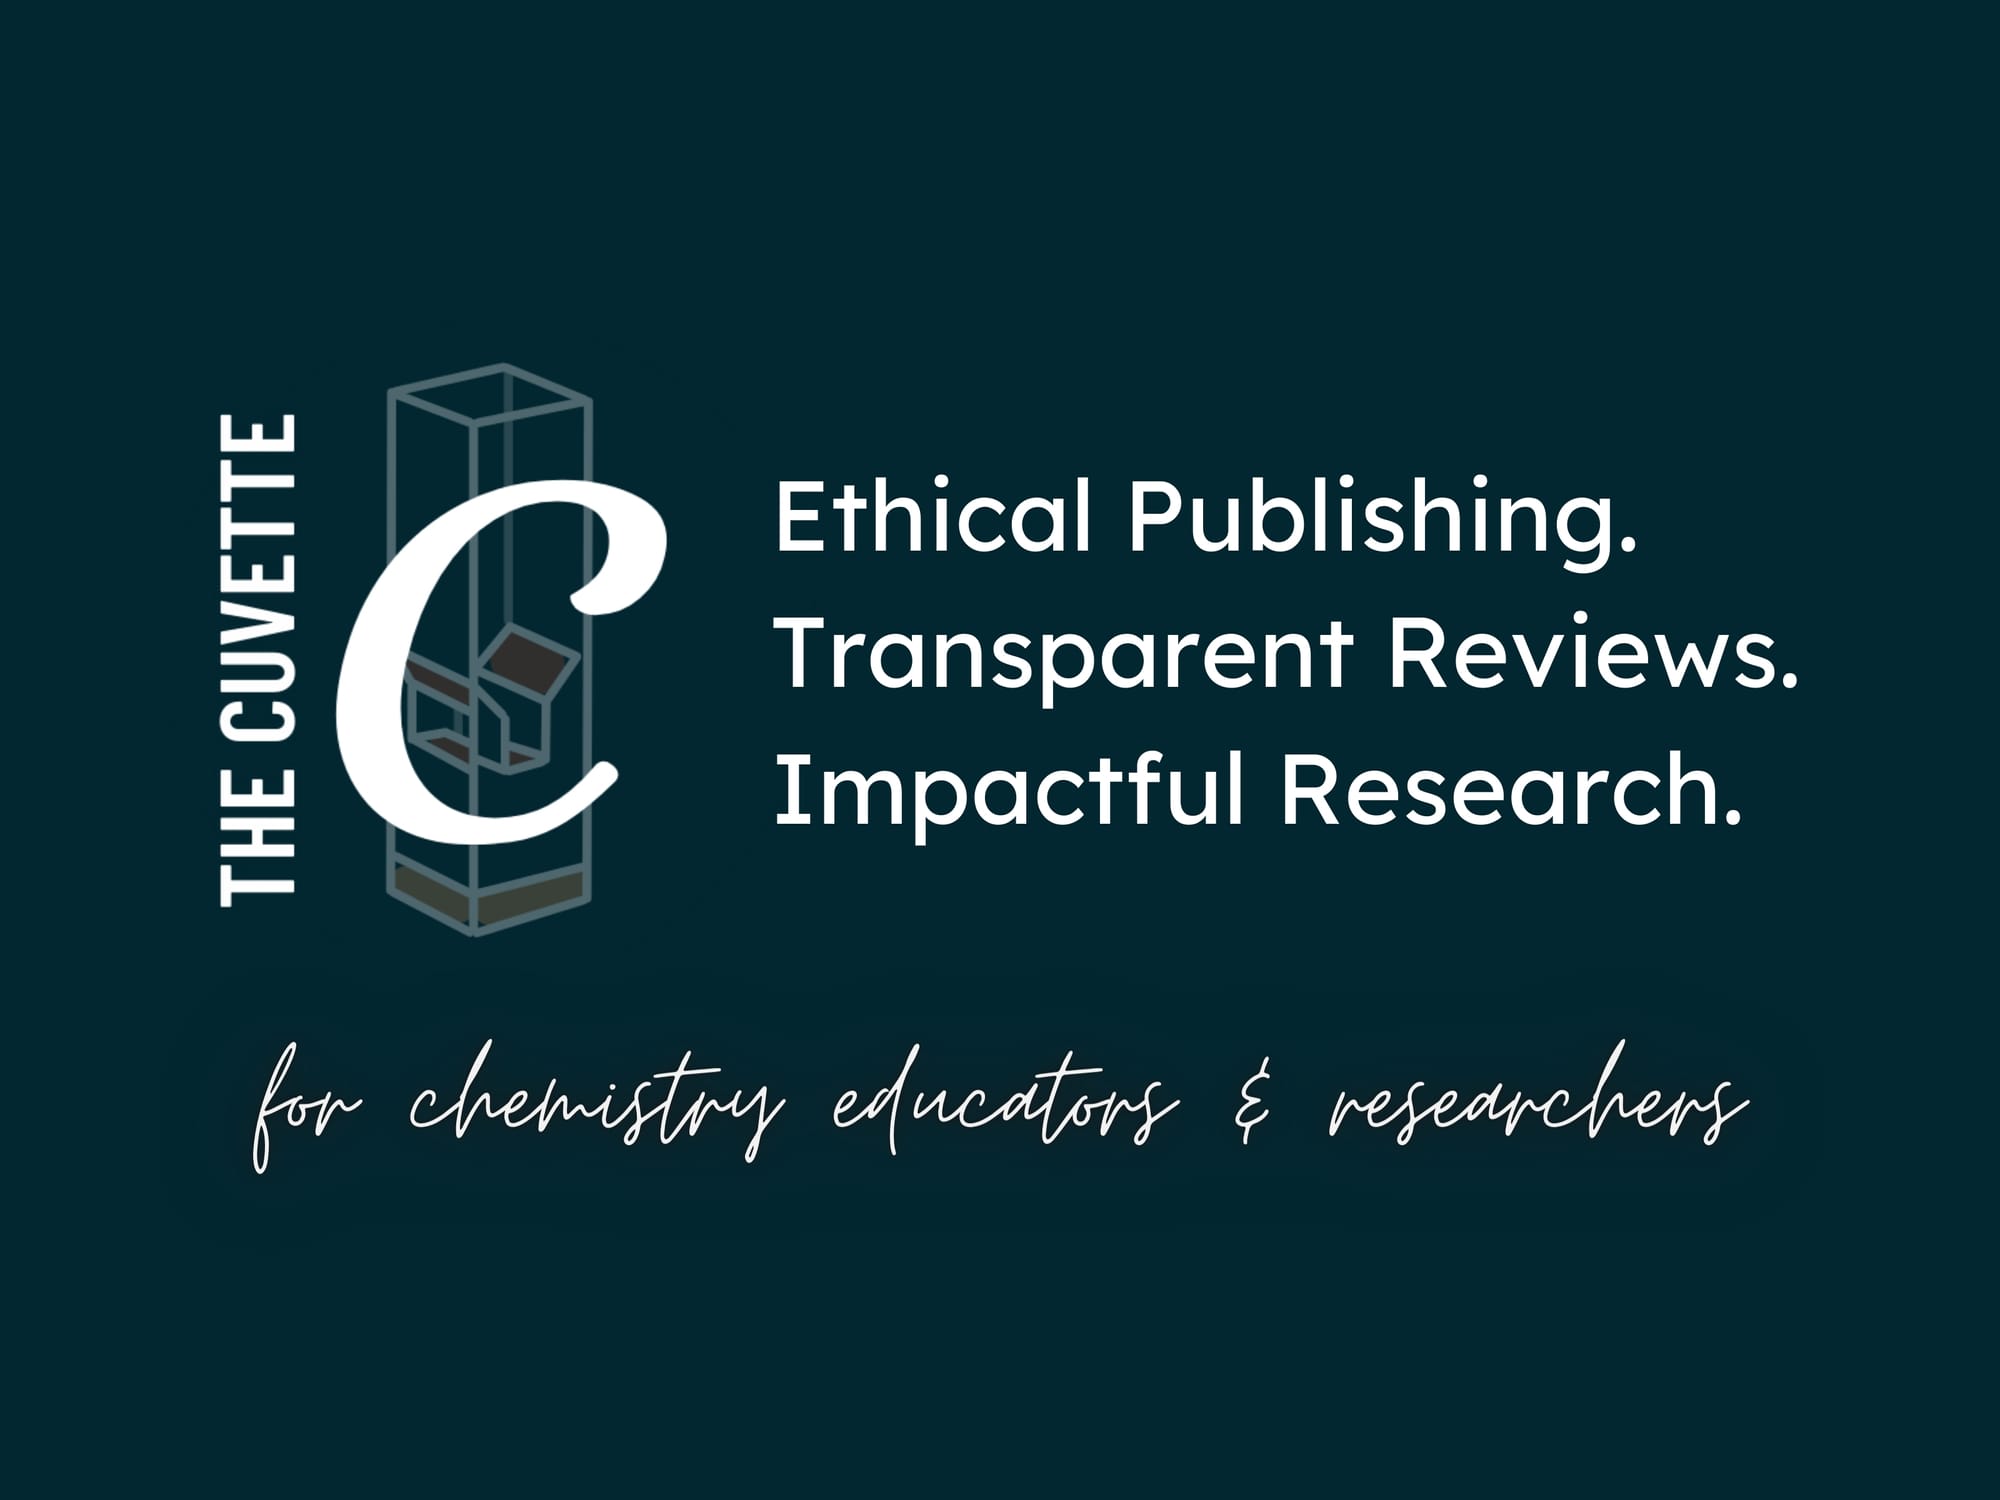 The image shows the logo for The Cuvette beside the phrases "Ethical publishing, transparent reviews, and impactful research" above the catchphrase "for chemistry educators and researchers."